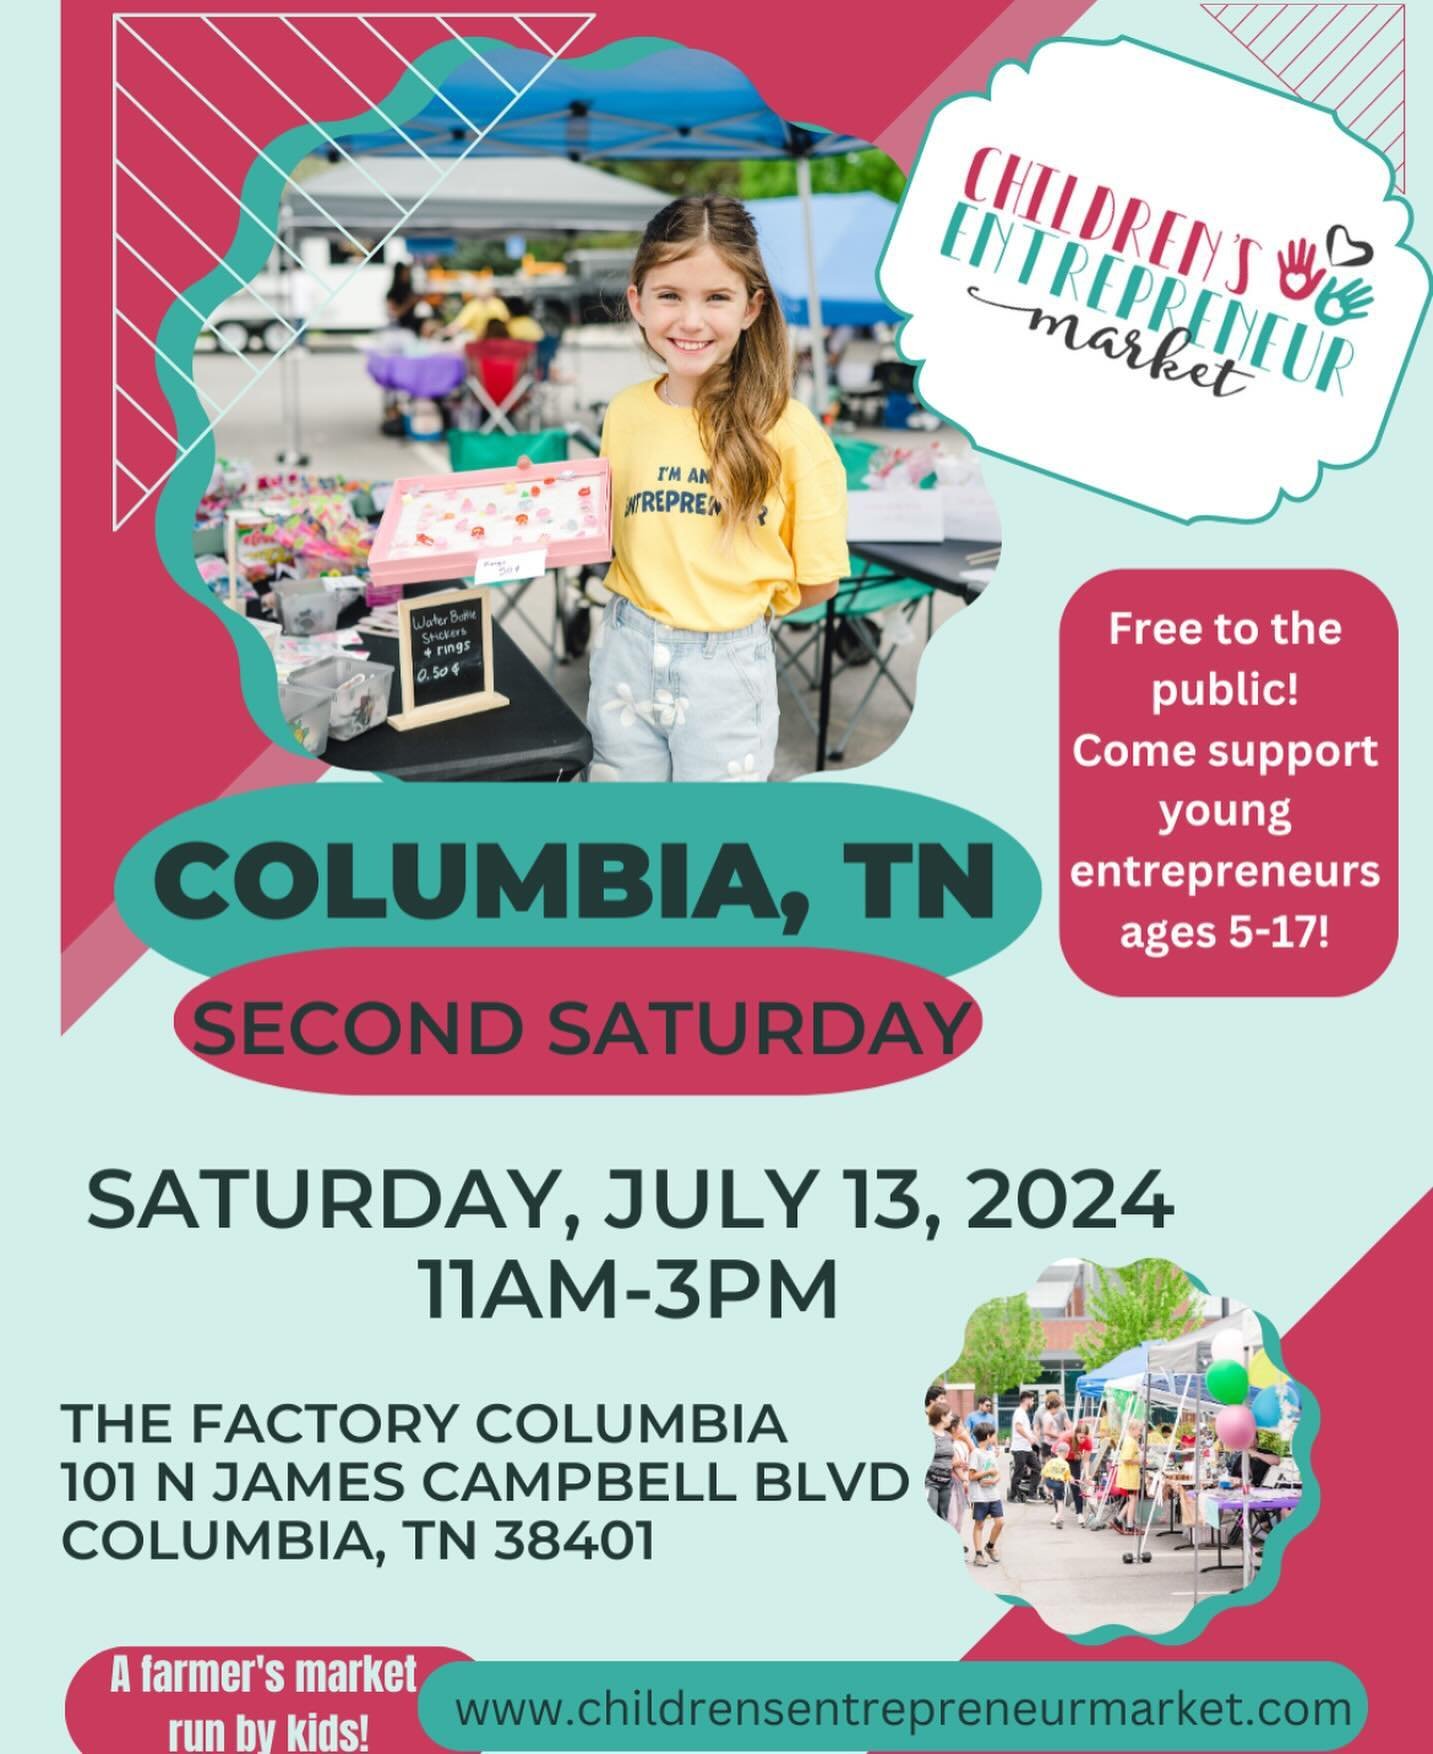 ☀️ Factory at Columbia is happy to partner with @childrensentrepreneurmarket for a very special Second Saturday on July 13, 2024. If you know a young entrepreneur that would like to participate as a vendor, please encourage them to sign up at:

www.c